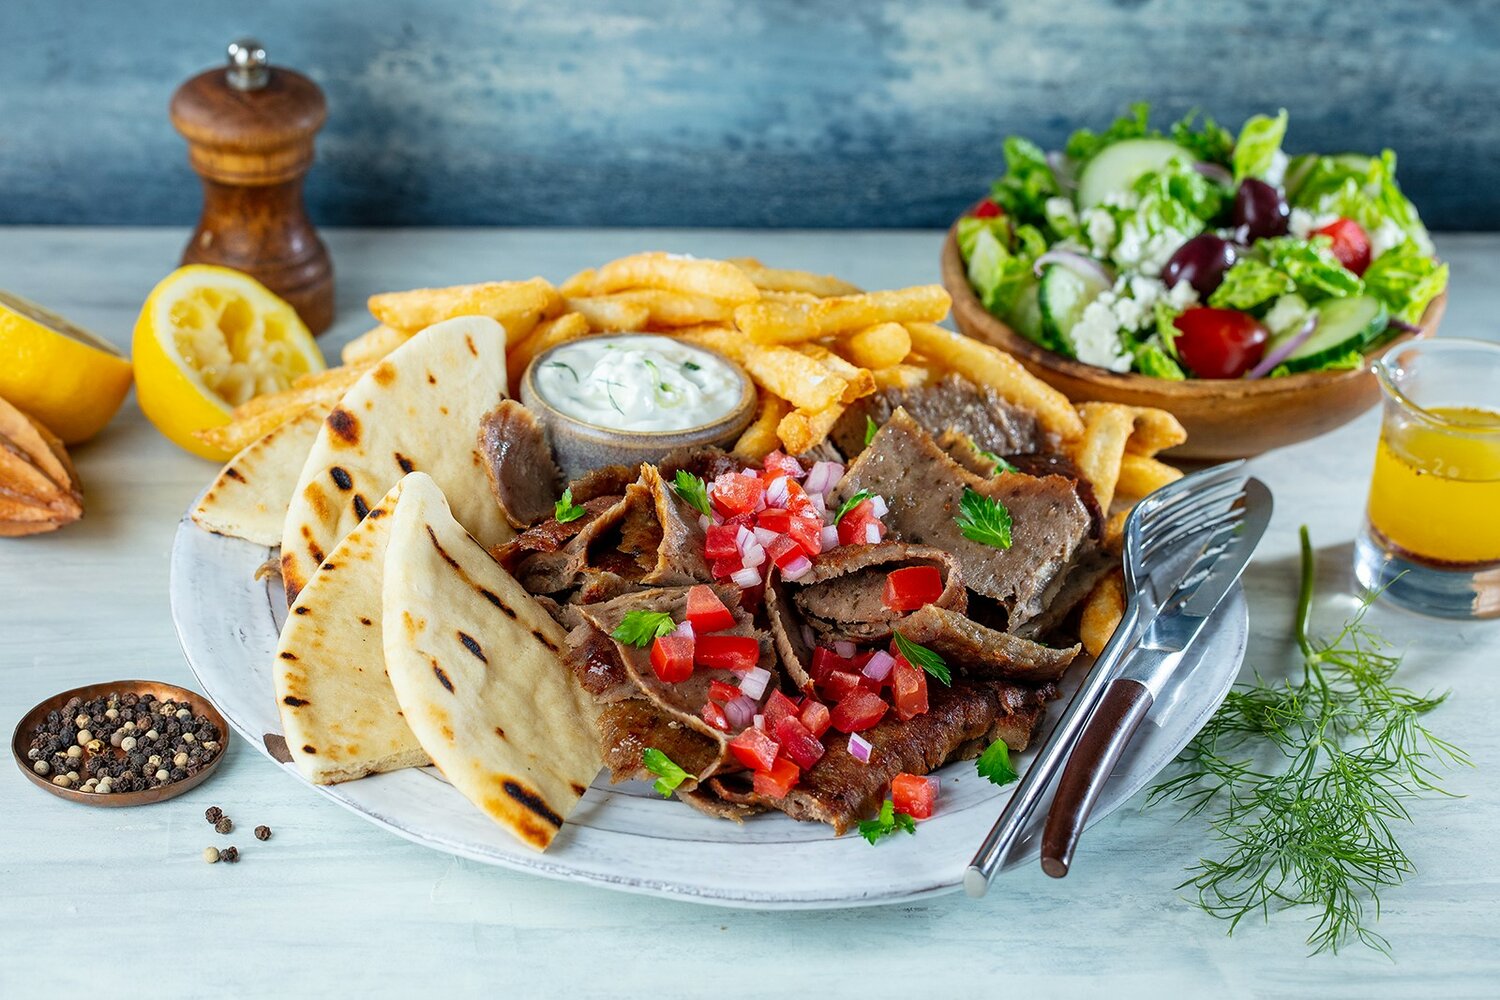 The Great Greek Mediterranean Grill is open 11 a.m.-8 p.m. daily for dine-in, pick-up and delivery. Catering is also available for large parties.